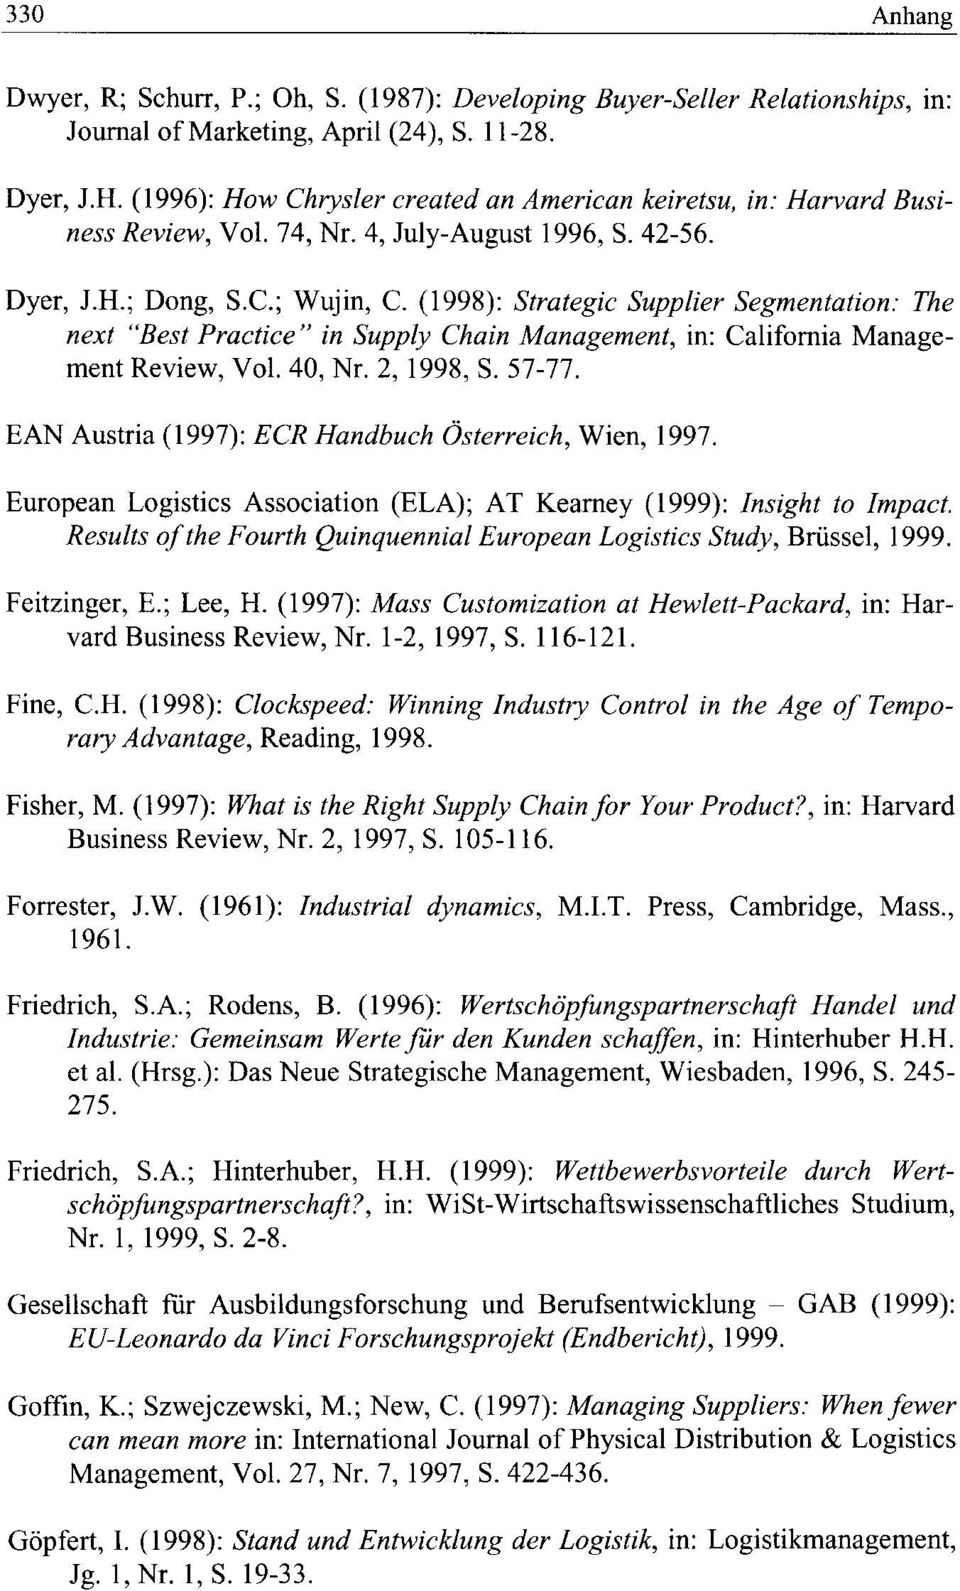 (1998): Strategic Supplier Segmentation : The next "Best Practice " in Supply Chain Management, in: California Management Review, Vol. 40, Nr. 2, 1998, S. 57-77.